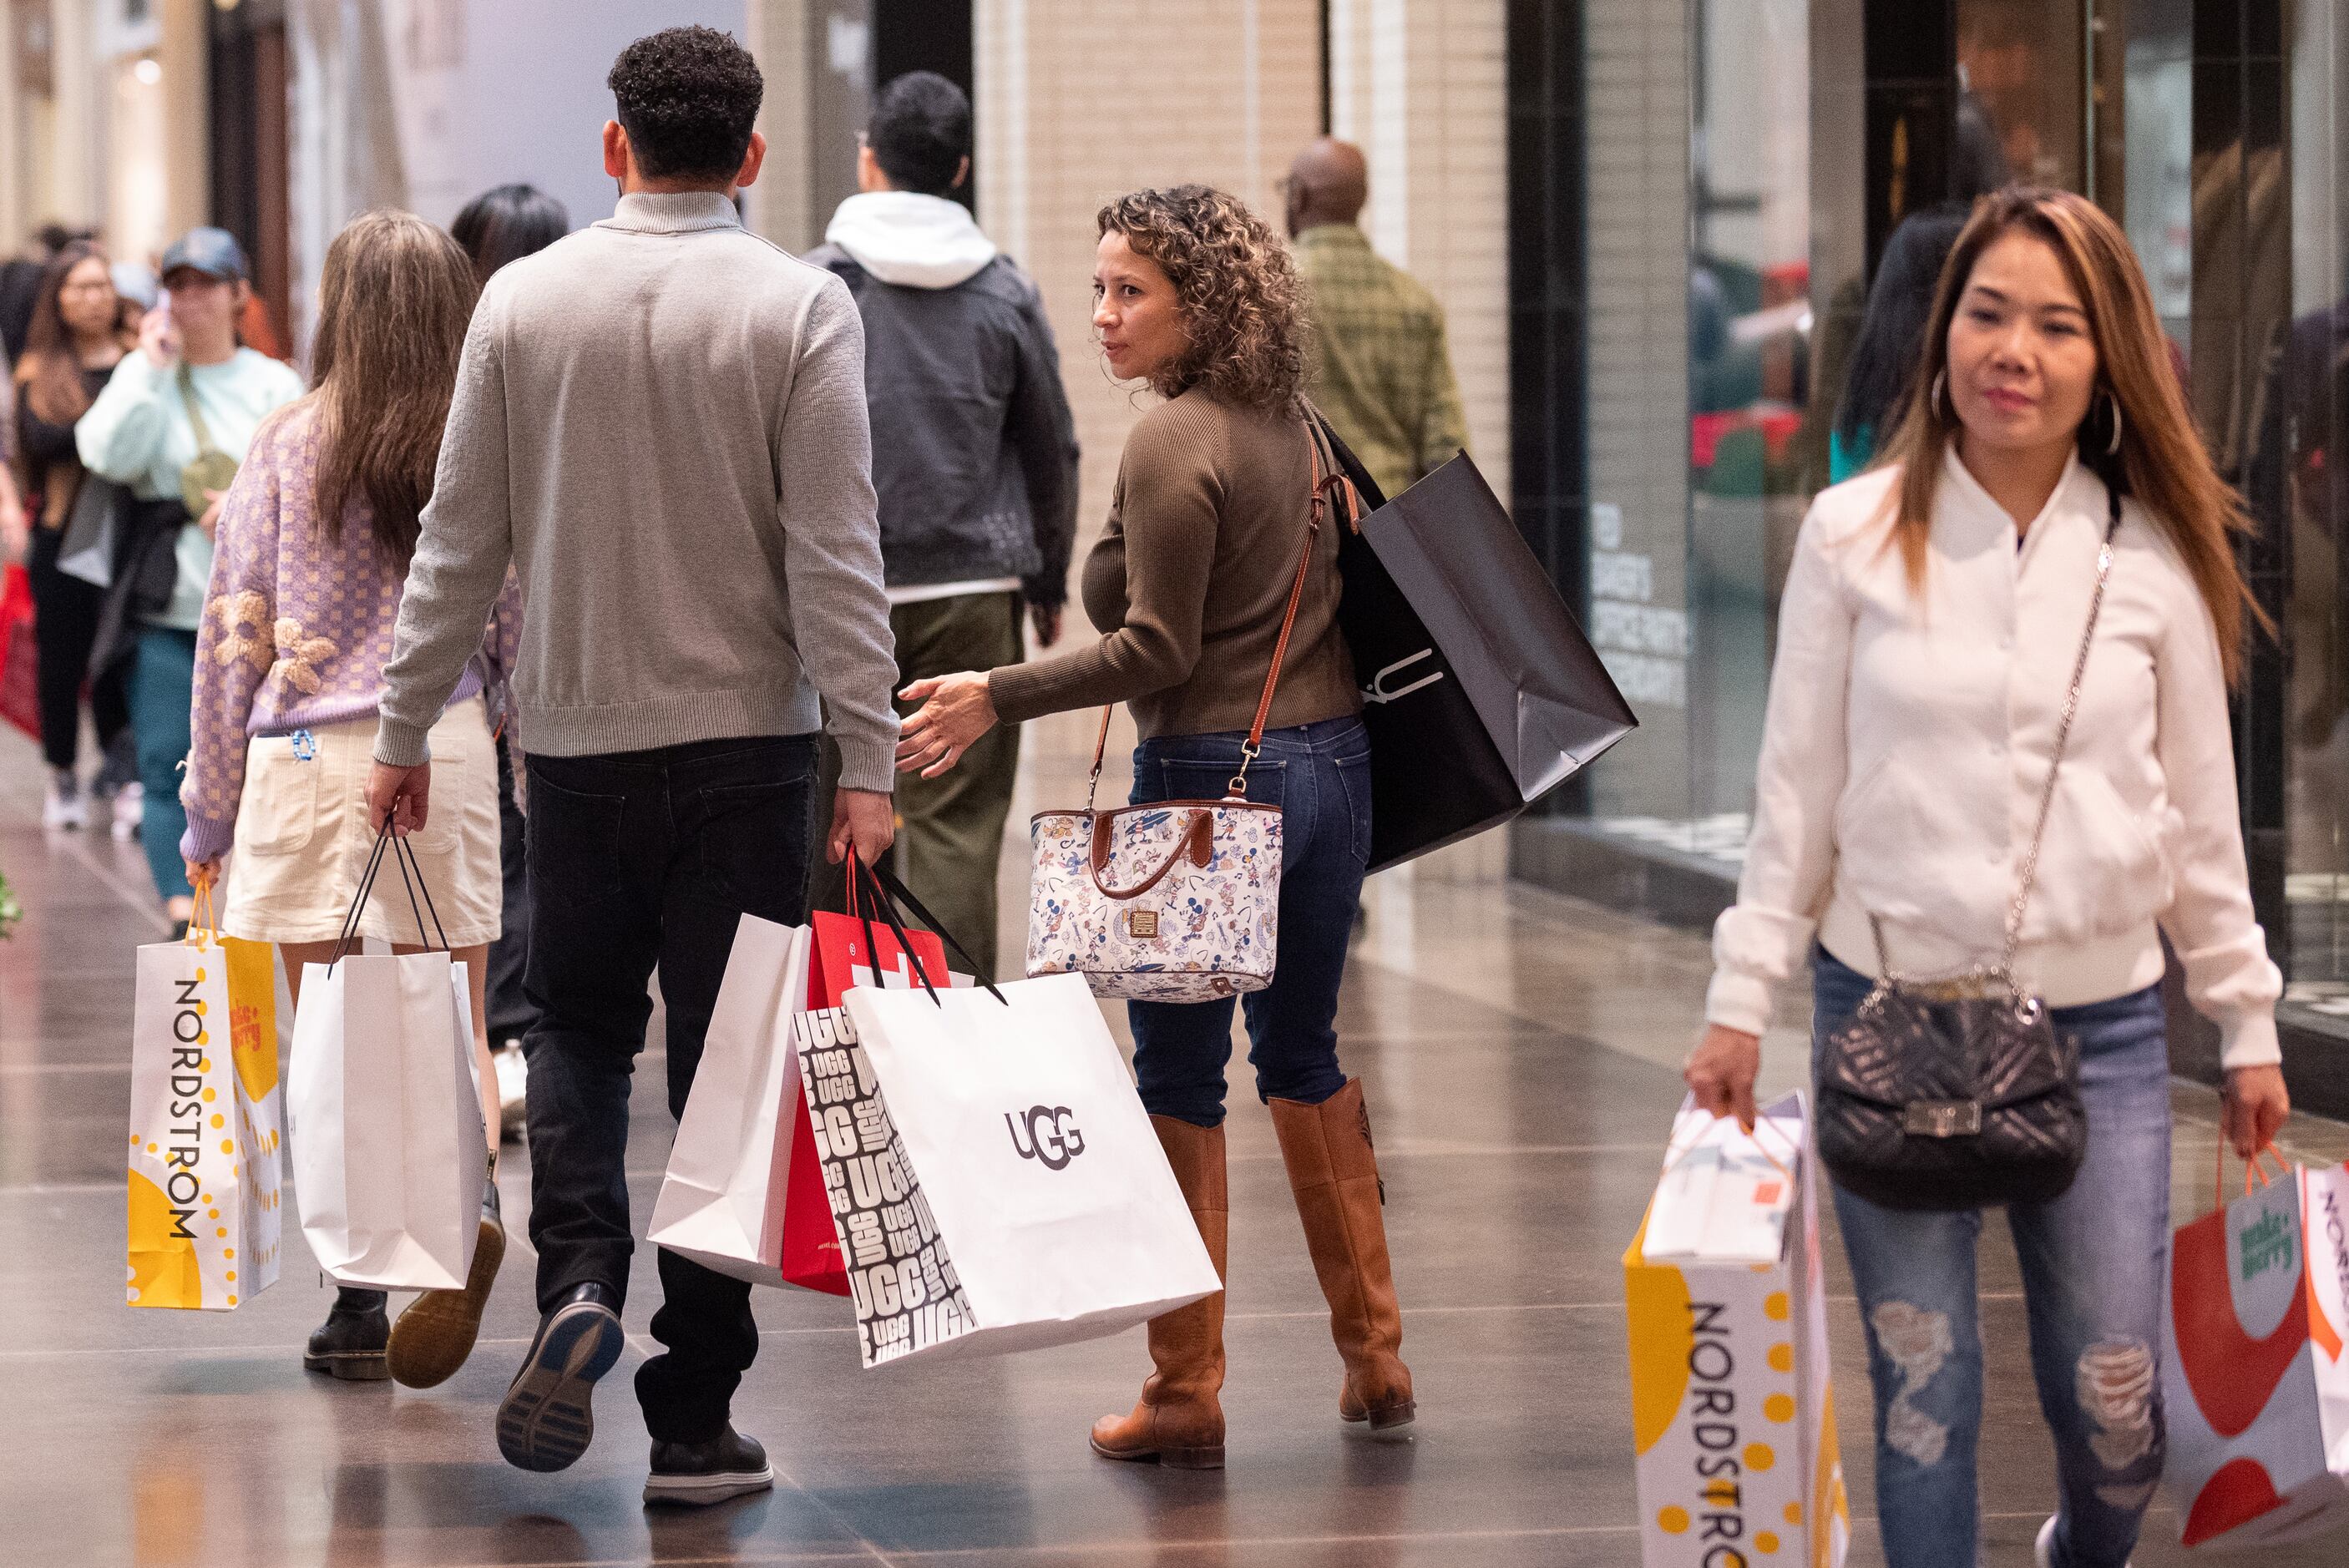 What inflation means for Christmas shopping and the holiday season